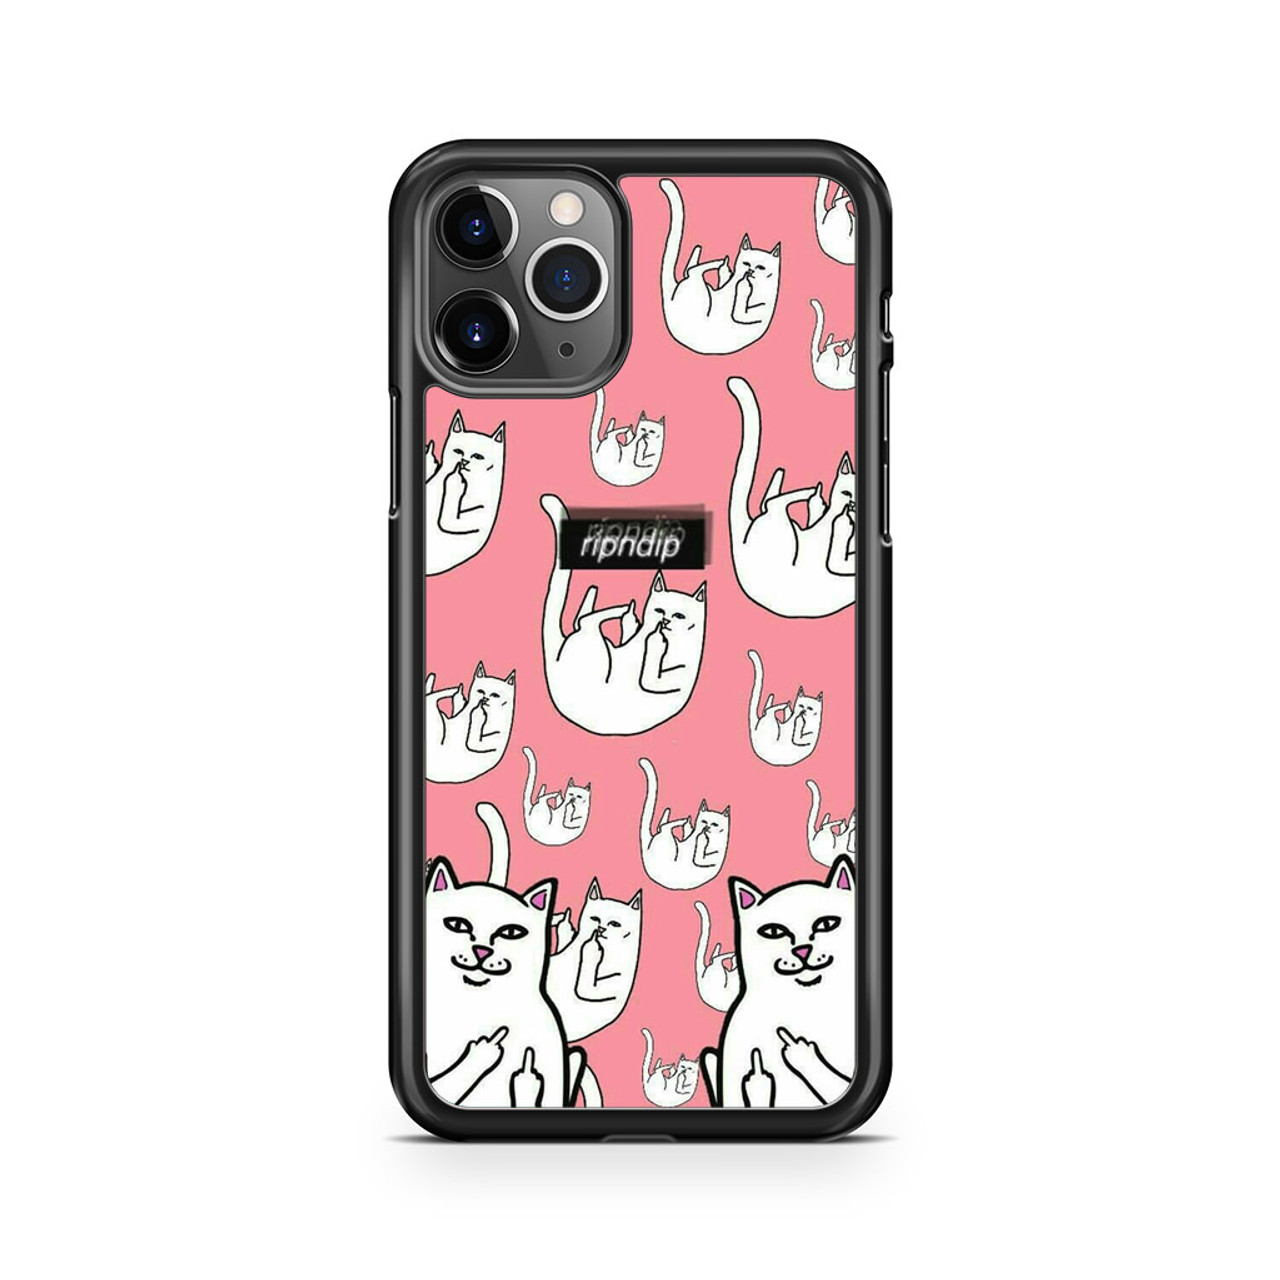 Rip N Dip Pink Iphone 11 Pro Max Case Caseshunter